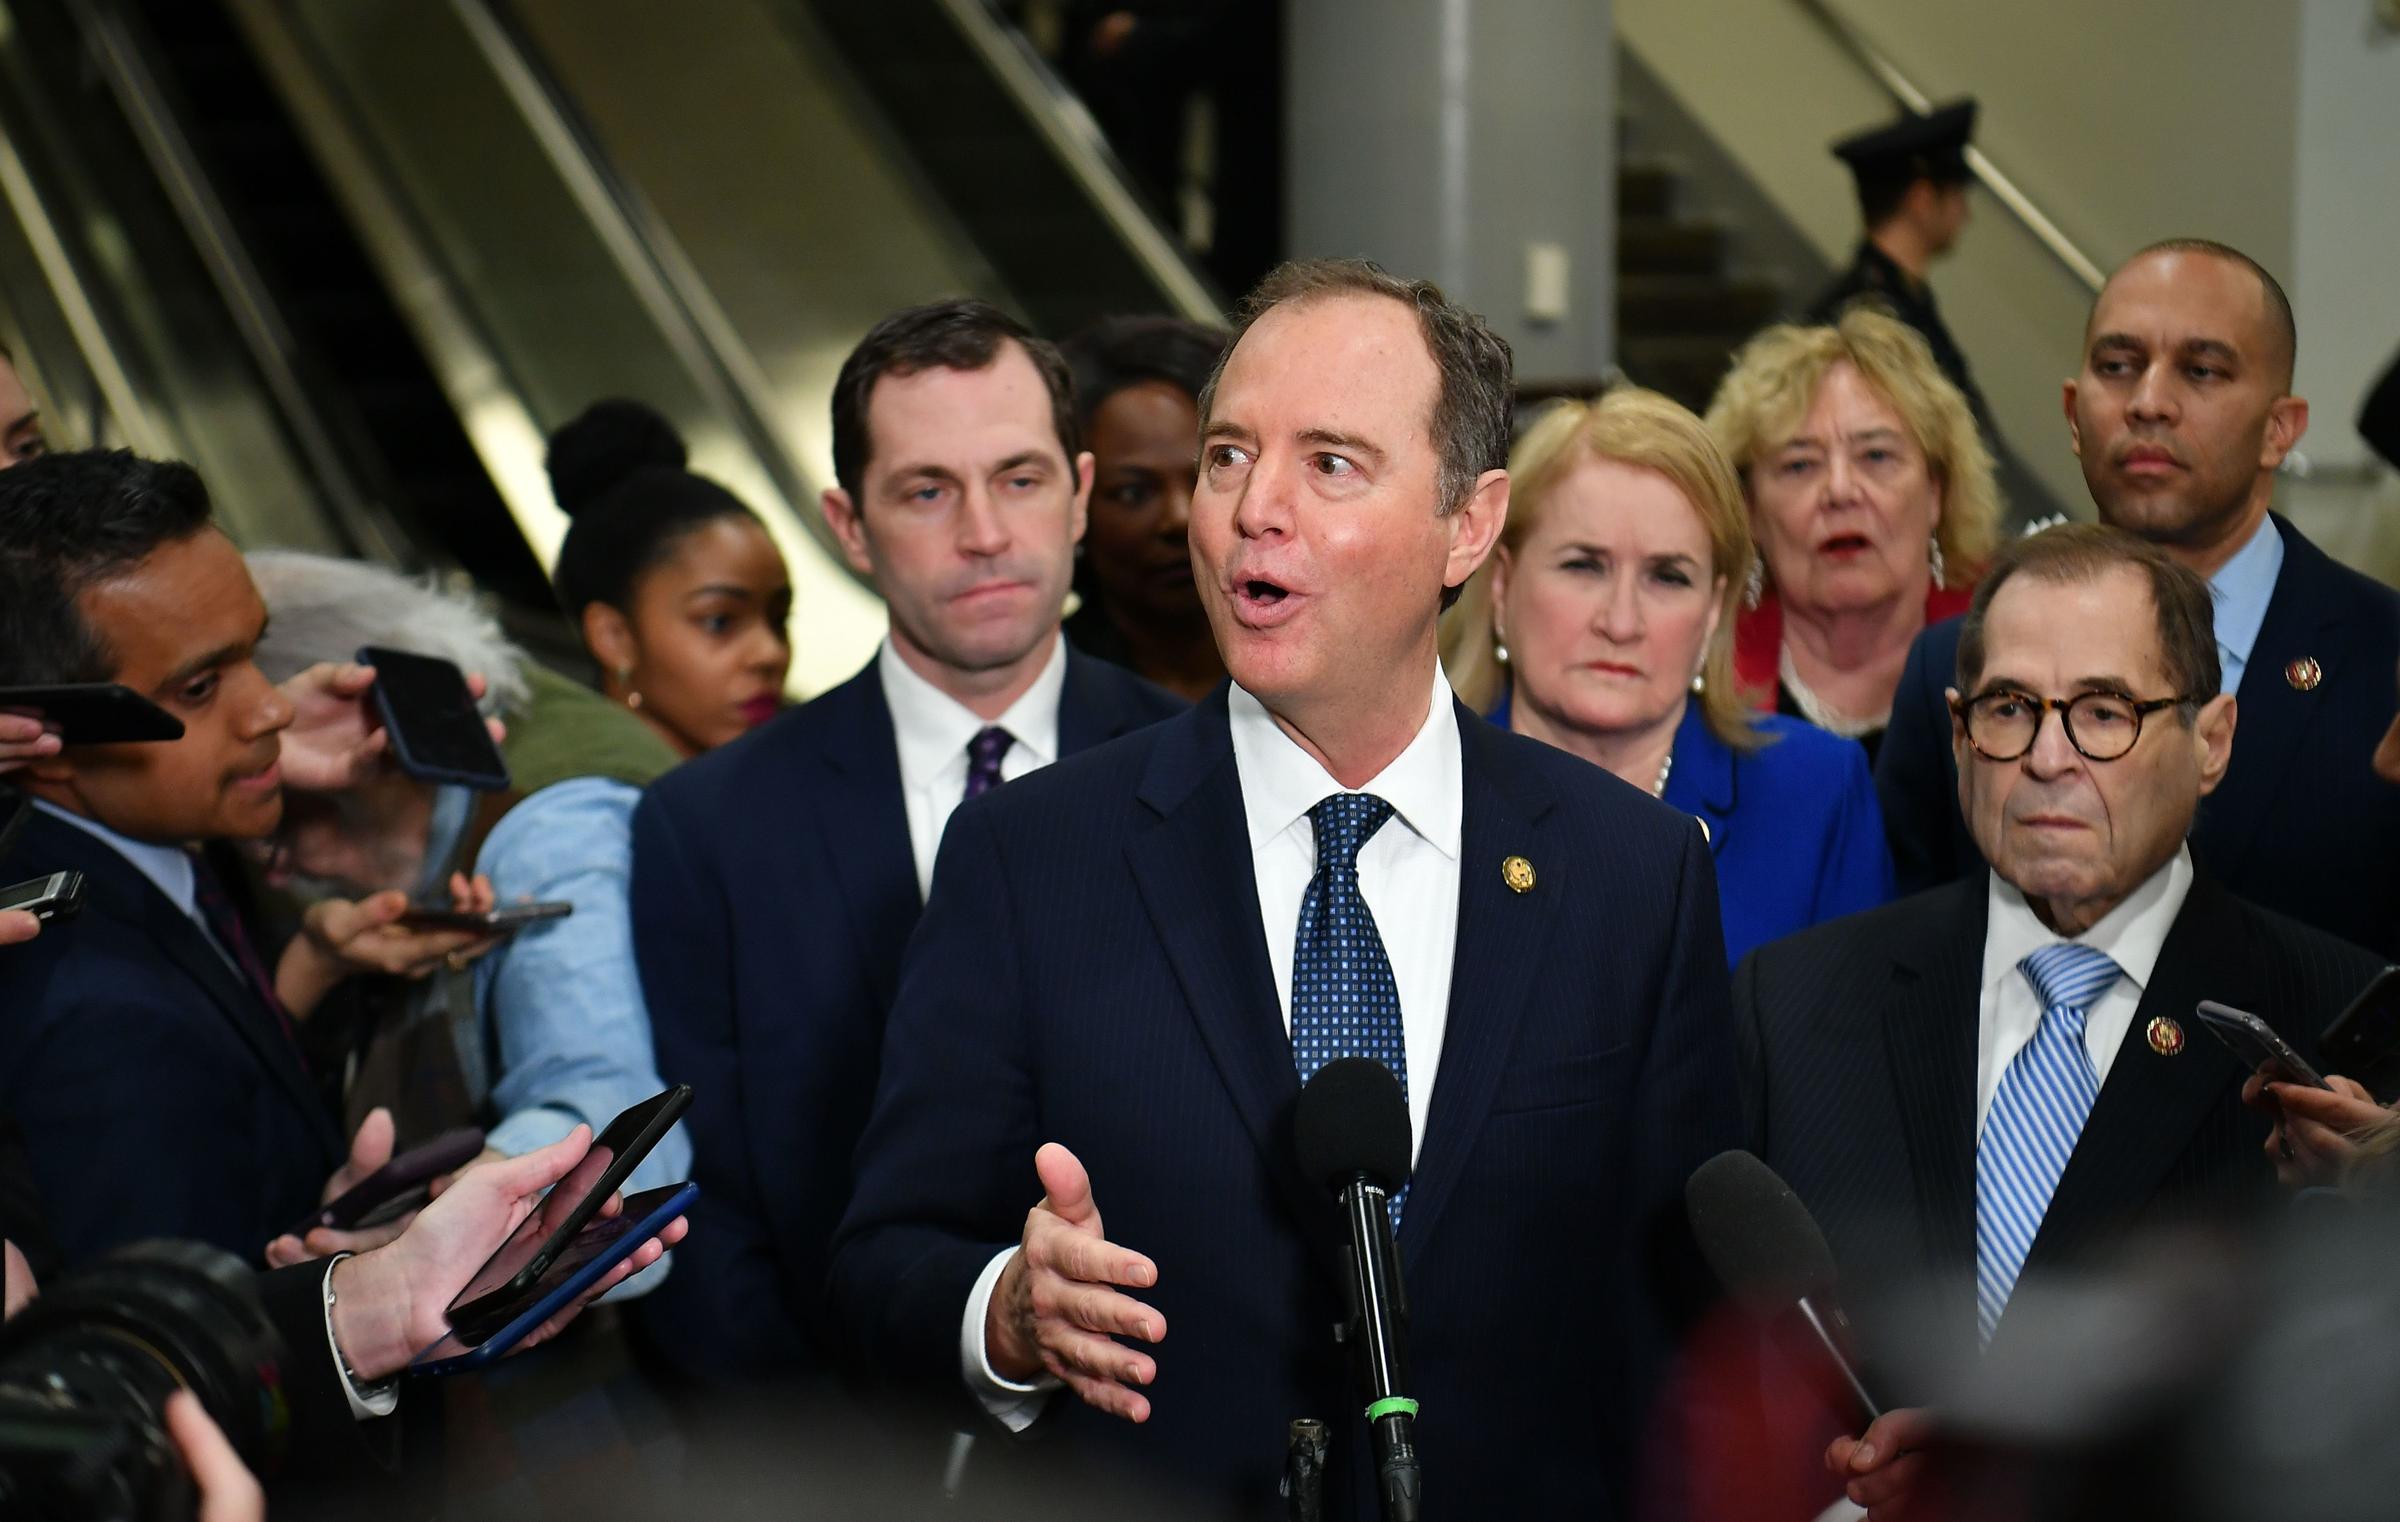 Image result for Trump impeachment prosecutor, Adam Schiff, is becoming Exhibit A in president's defense